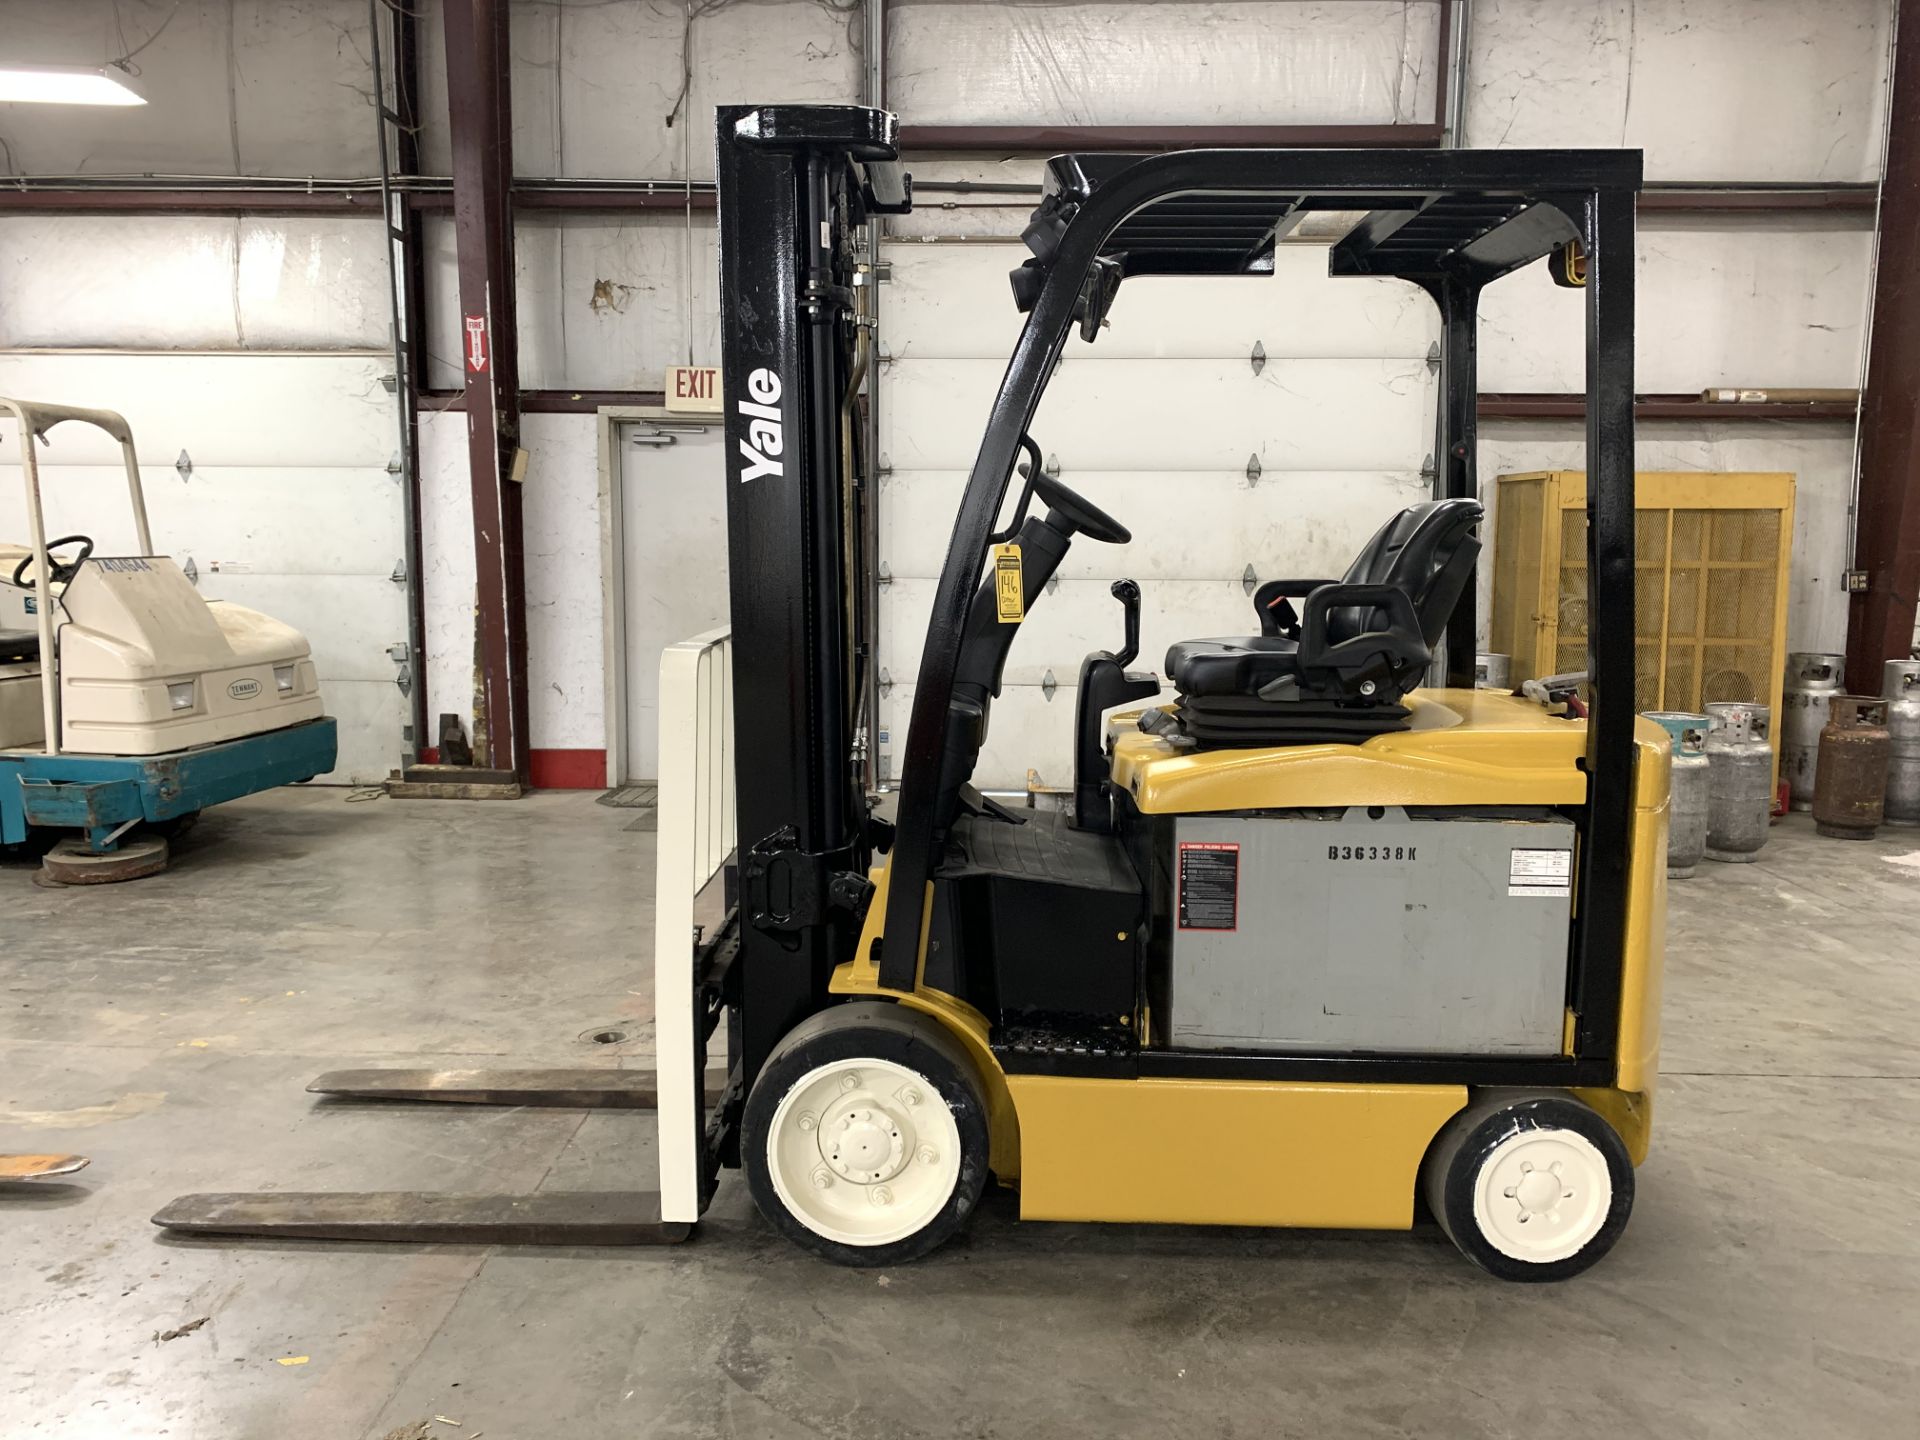 *LOCATED OHIO* 2012 YALE 5,000-LB. CAP FORKLIFT, MOD: ERC050VG, 36V, 3-STAGE, SIDESHIFT, SOLID TIRES